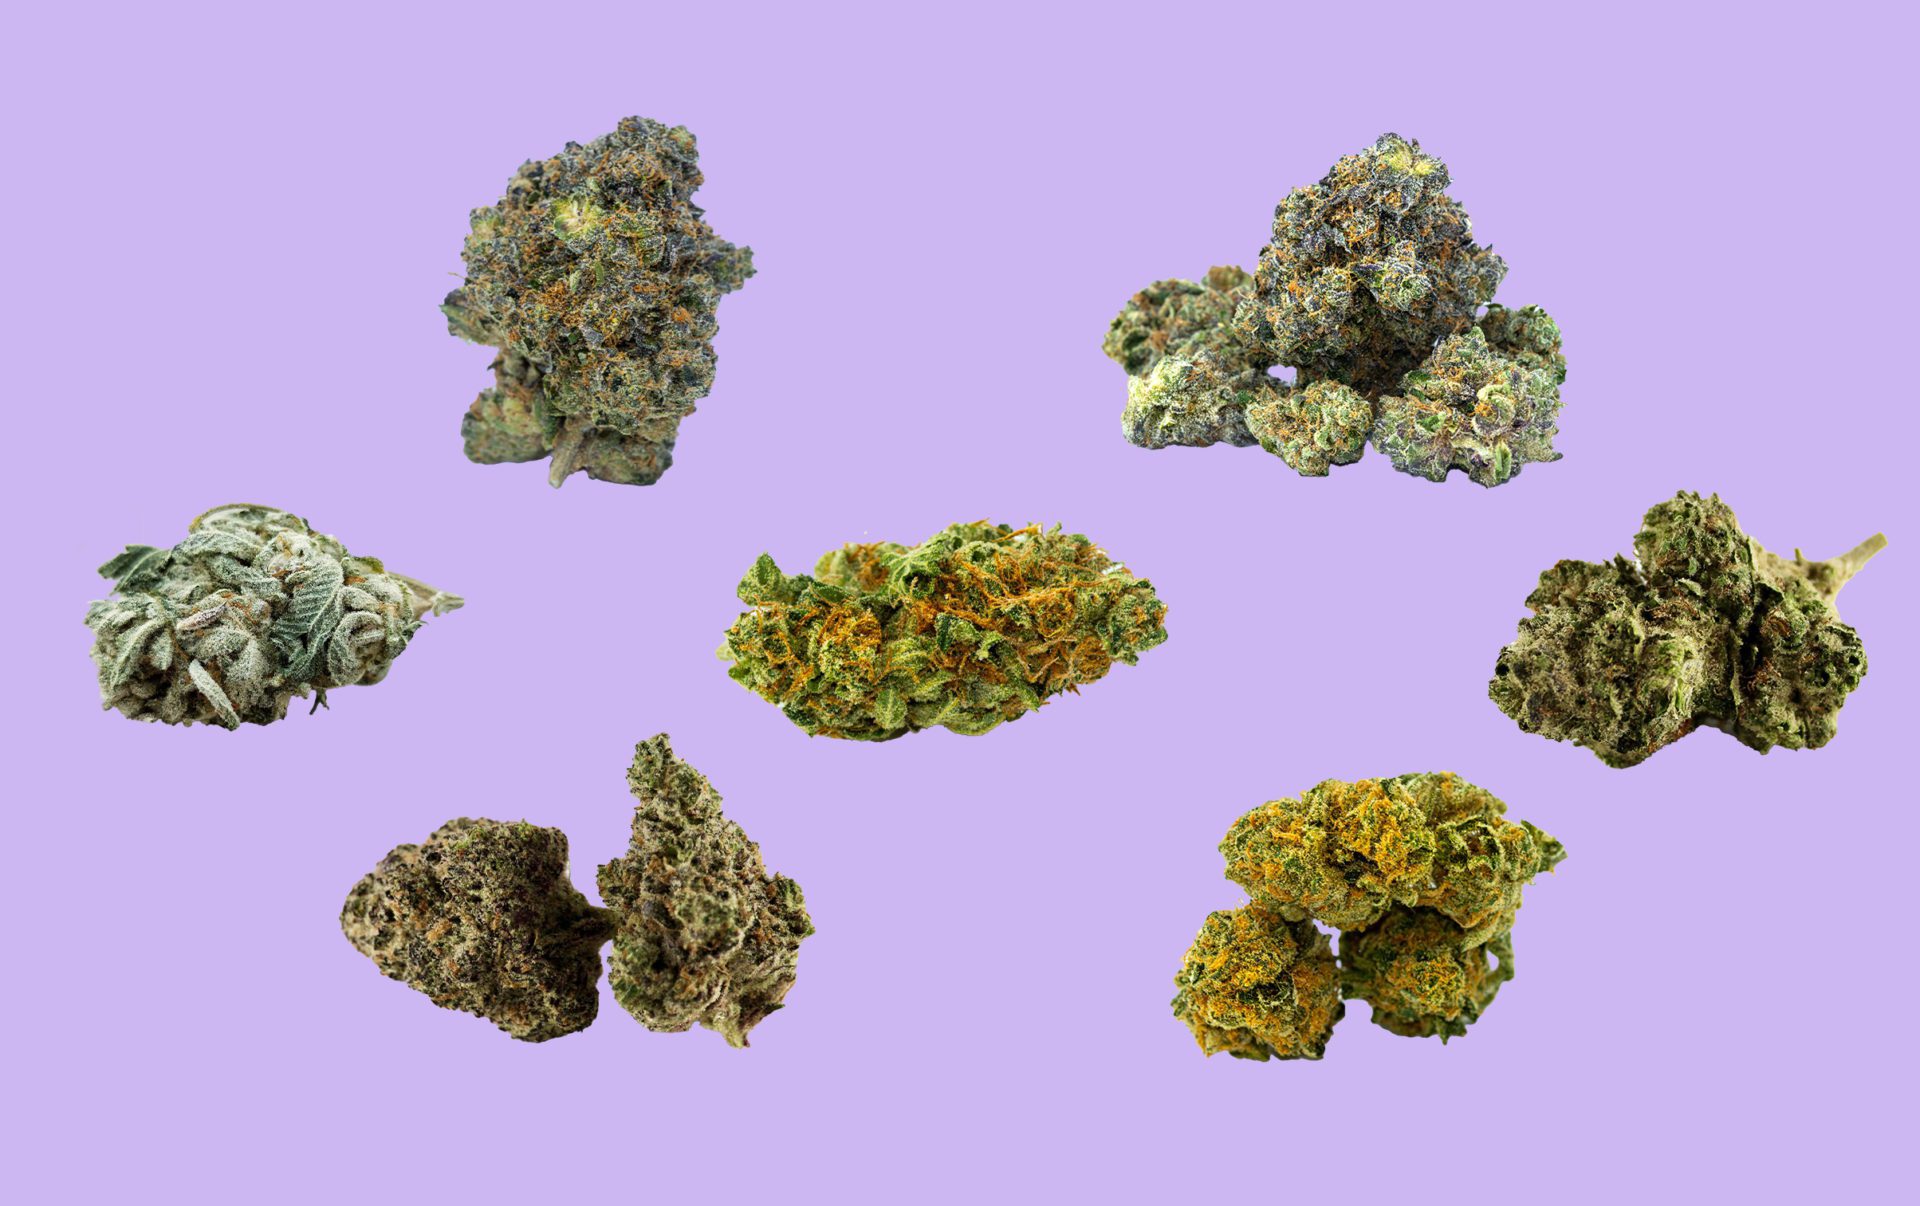 Finding the right strain